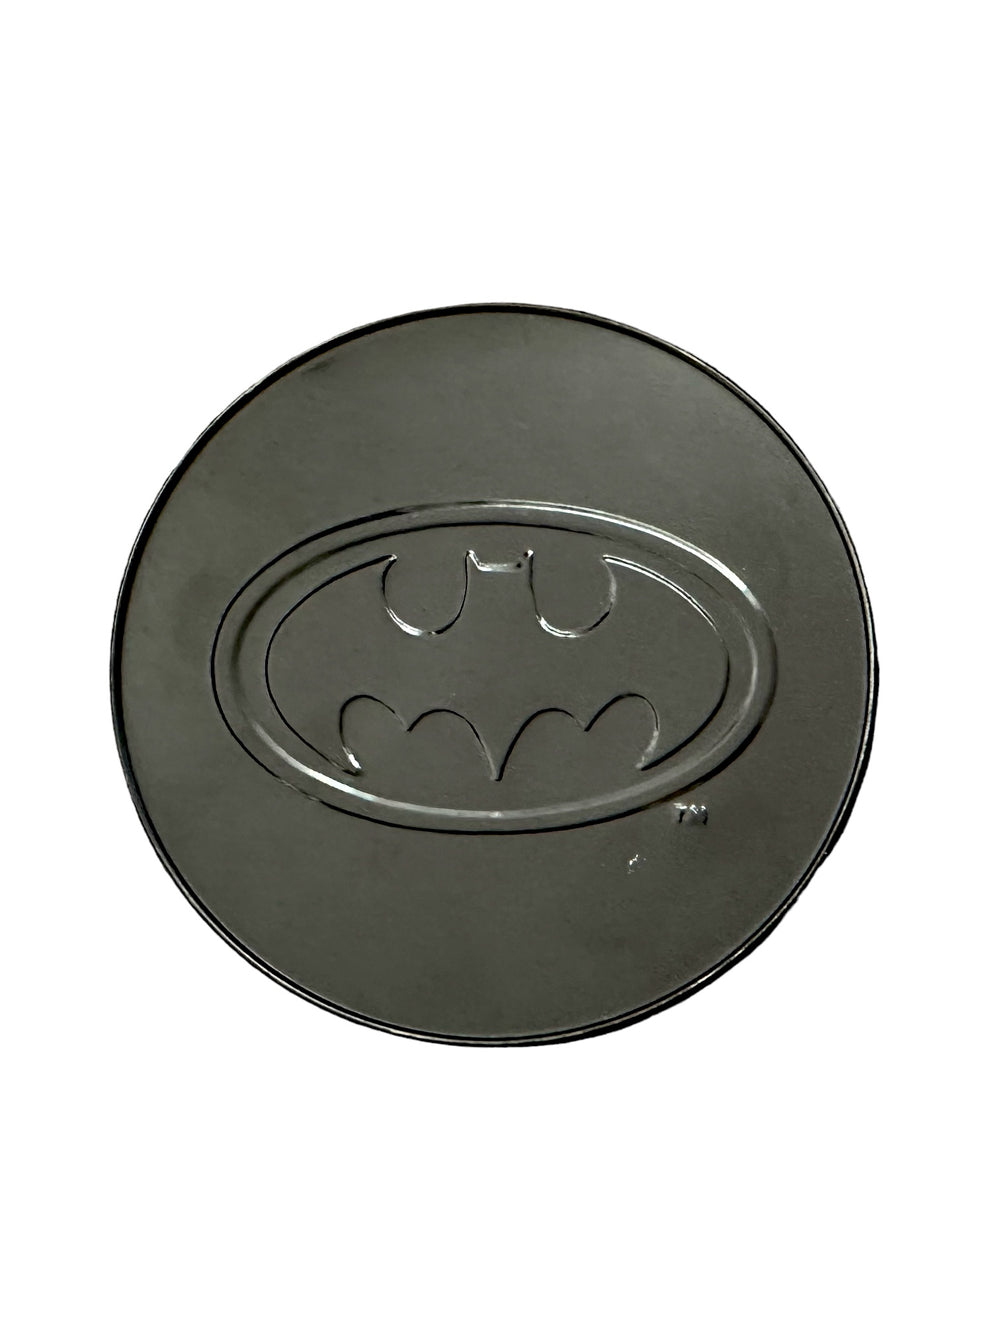 Prince – Batman Soundtrack CD Album In A Round Embossed Tin 1989